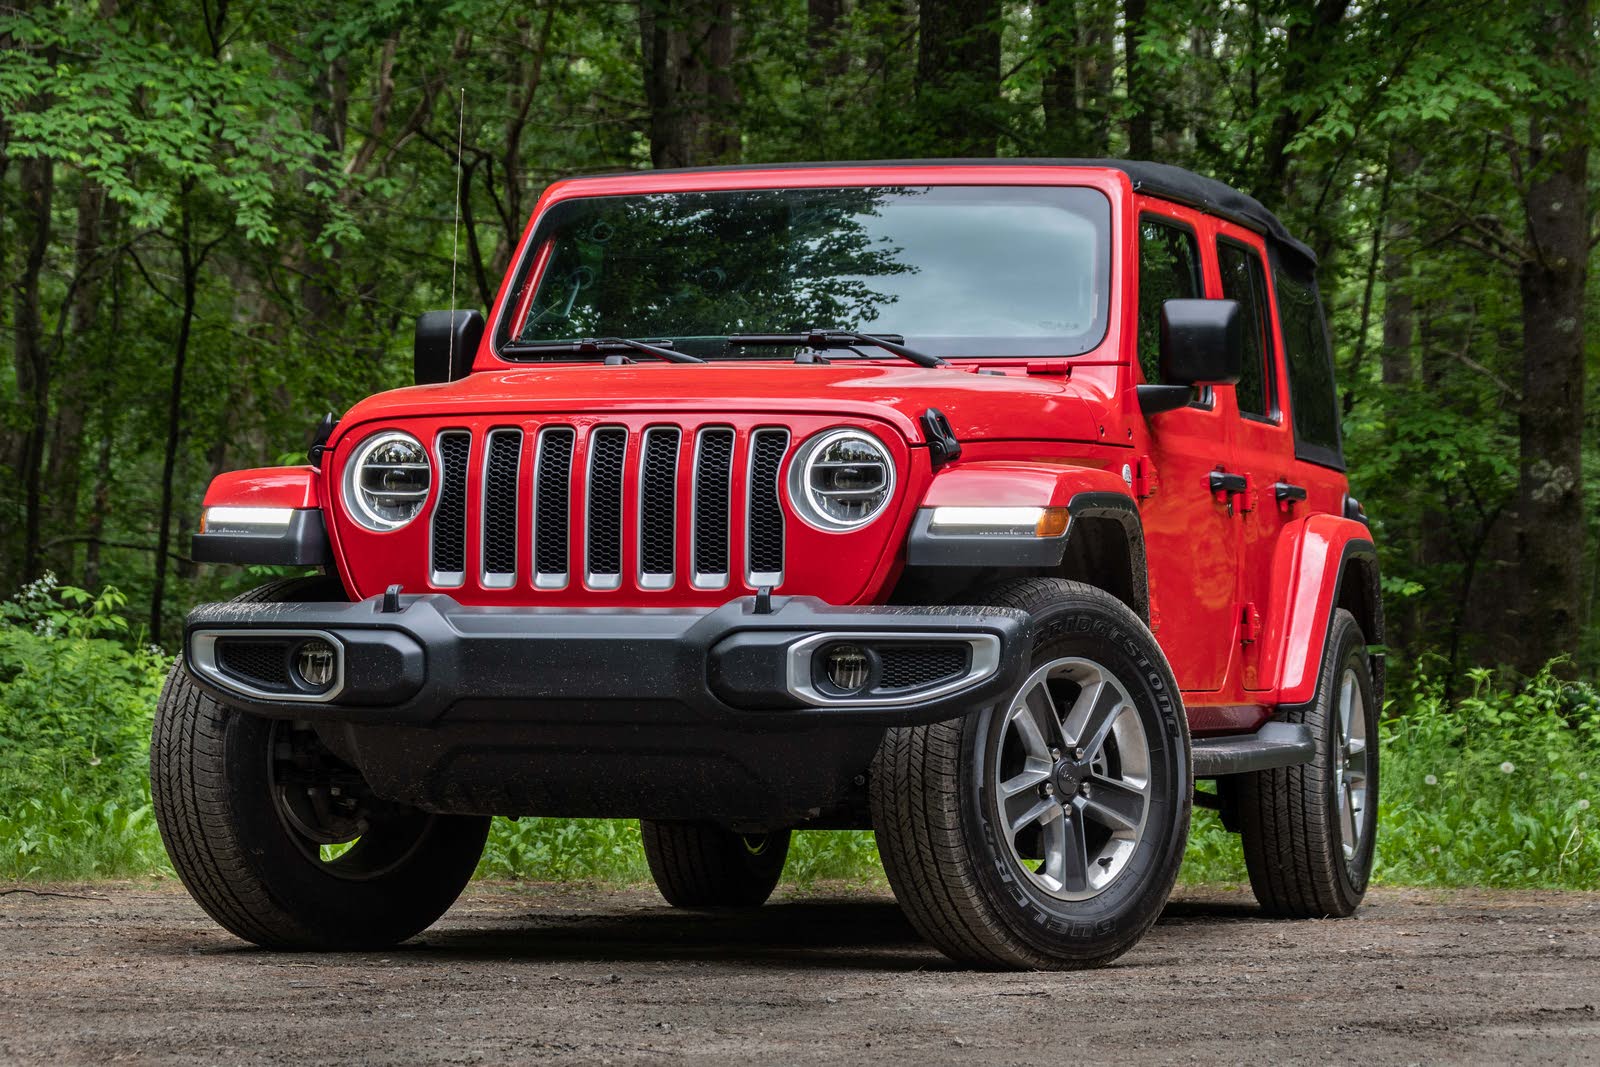 2018 Jeep Wrangler: Prices, Reviews & Pictures - CarGurus